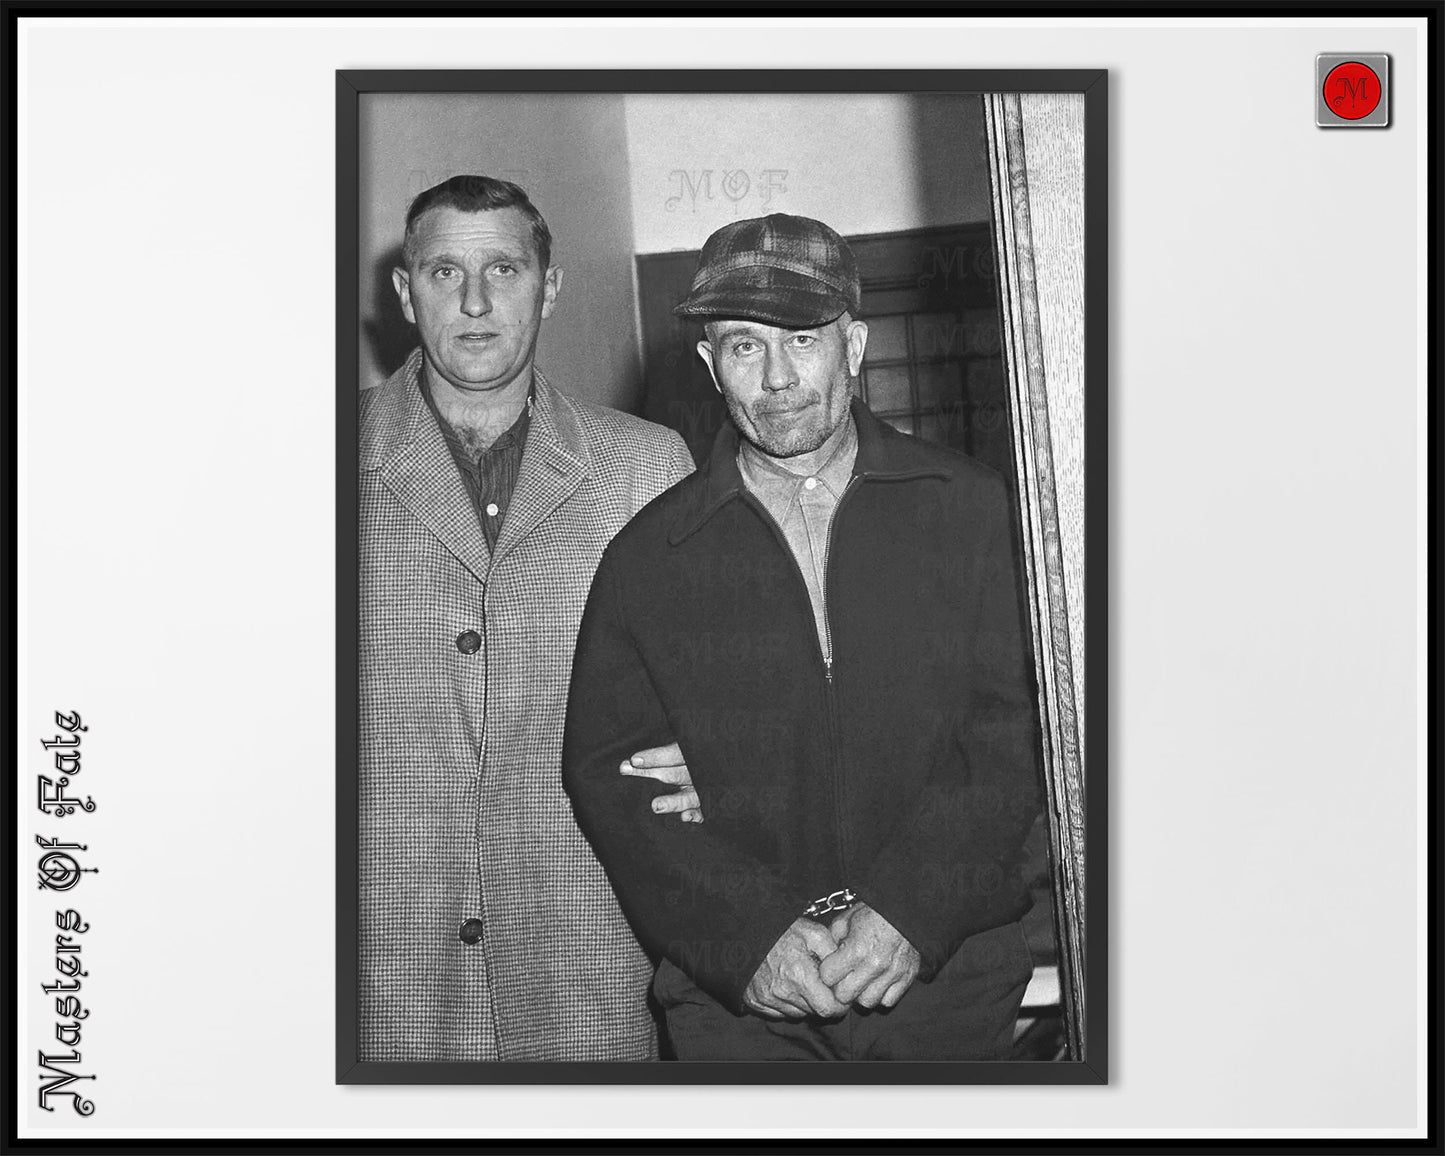 Ed Gein Arrested in Cuffs True Crime American History Photo REMASTERED